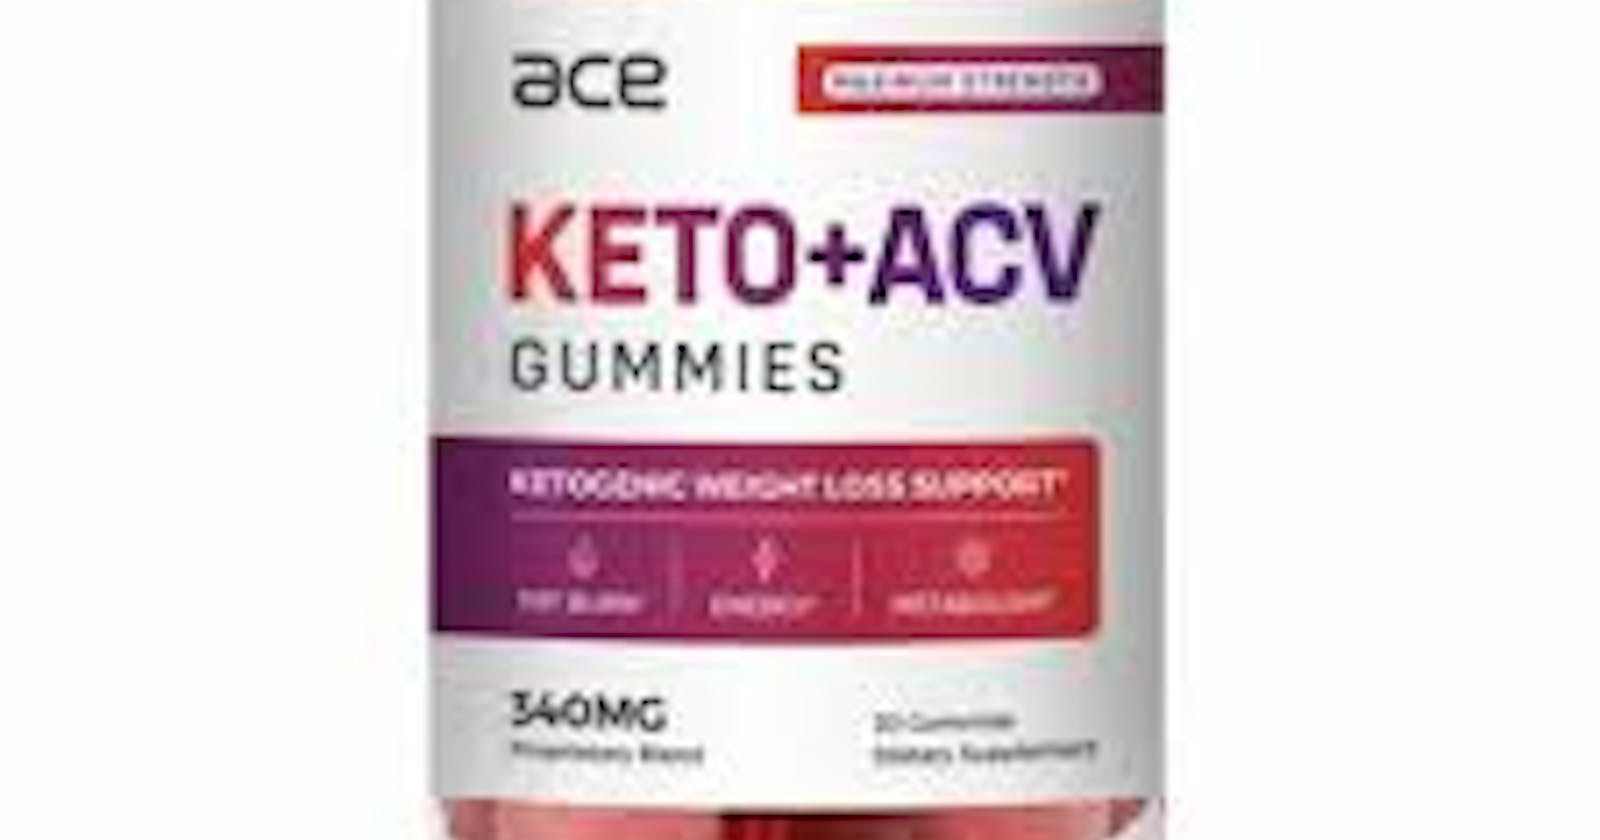 Ace Keto ACV Gummies Review - Scam Brand or Safe Weight Loss Gummy?